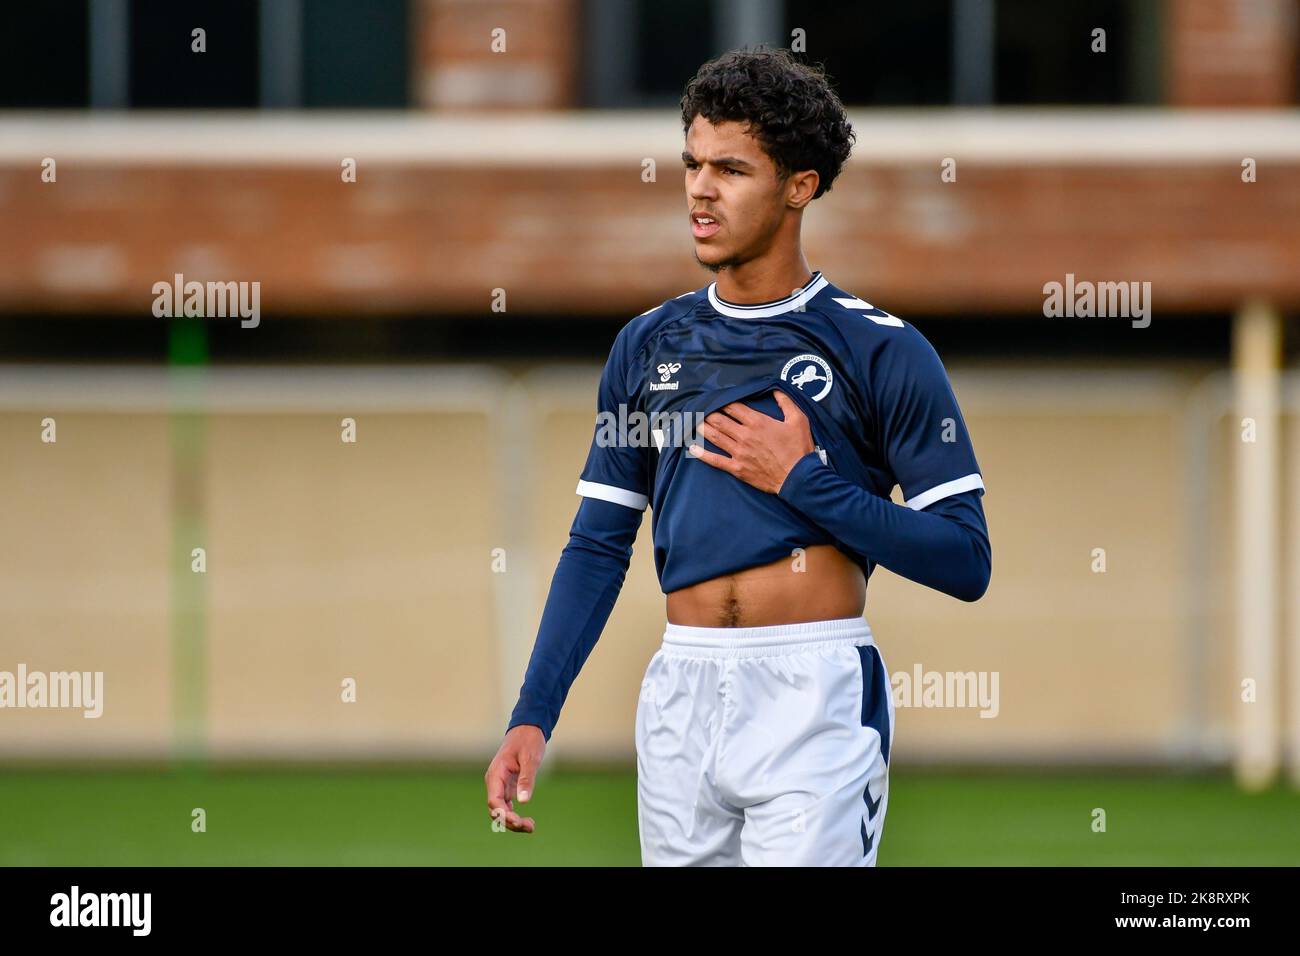 Swansea, Wales. 24 October 2022. Kyle Smith of Millwall after the  Professional Development League game between Swansea City Under 21 and  Millwall Under 21 at the Swansea City Academy in Swansea, Wales